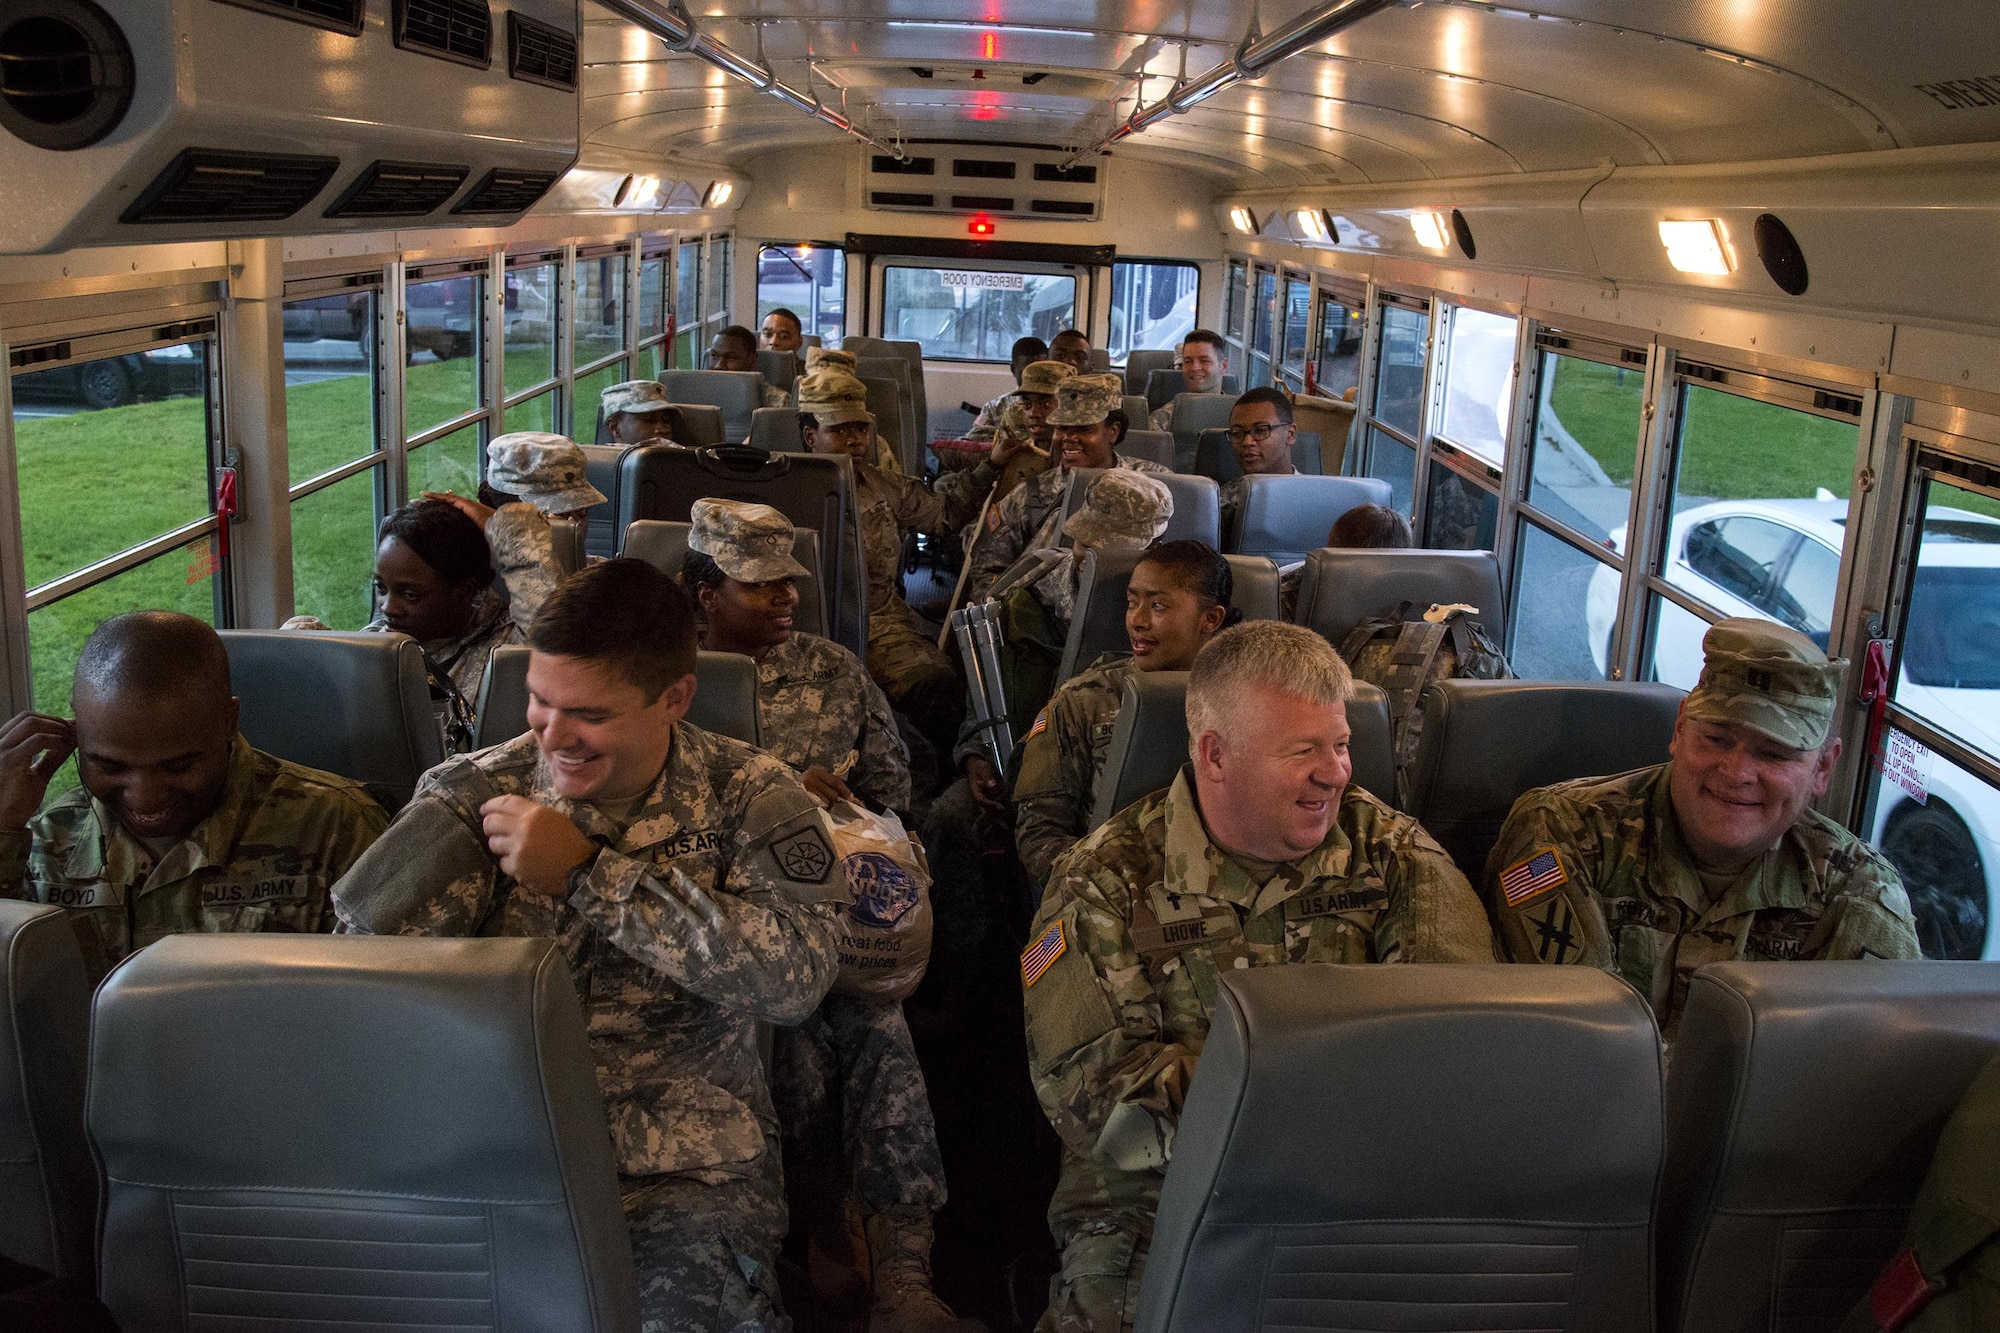 Georgia Army National Guardsmen await departure on a bus, Sept. 13, 2017, at Moody Air Force Base, Ga. Units from the 48th Infantry Brigade Combat Team and Joint Task Force 781st Chemical, Radiological, Nuclear, Explosive Response Package stayed the night at Moody before heading to Orlando, Fla., to provide humanitarian relief for the victims of Hurricane Irma. (U.S. Air Force photo by Airman 1st Class Erick Requadt)